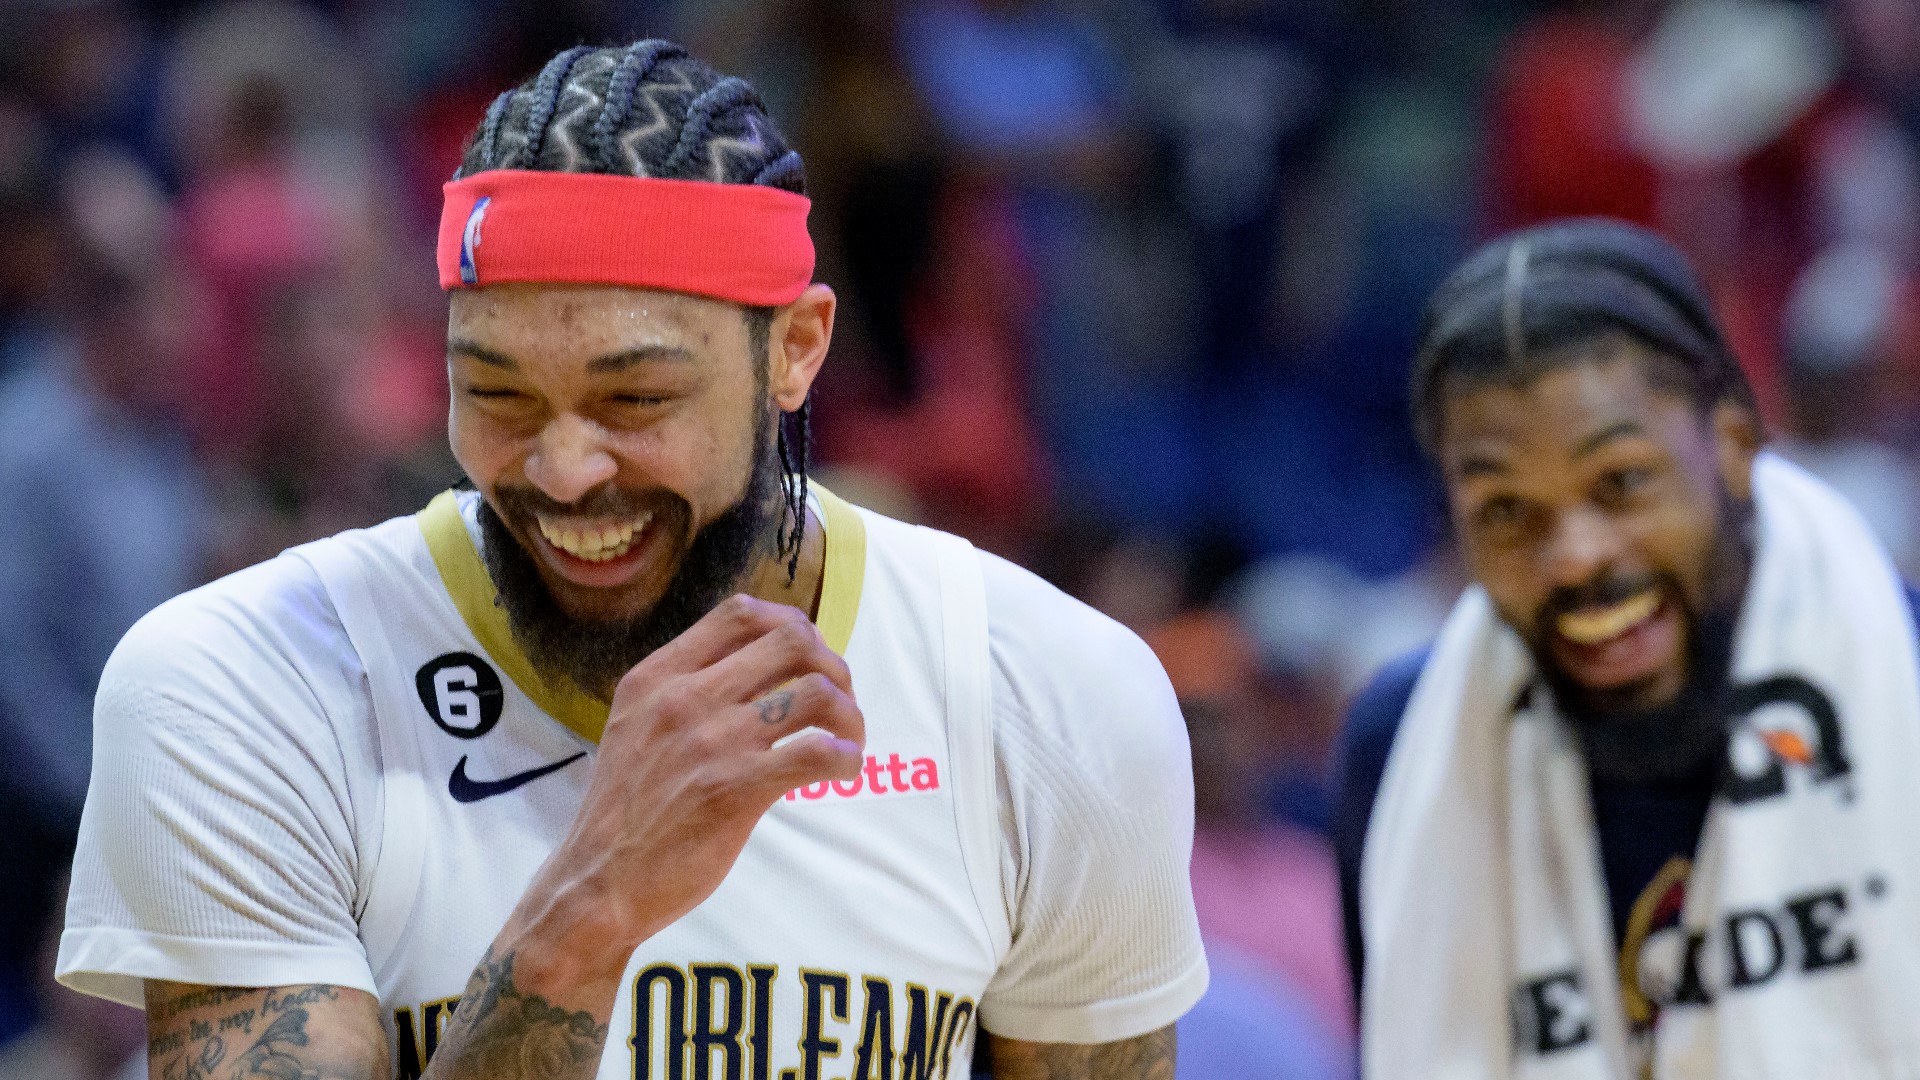 Doug Mouton breaks down the scenarios where the Pelicans can make the playoffs, and what seed they are most likely to end up at.